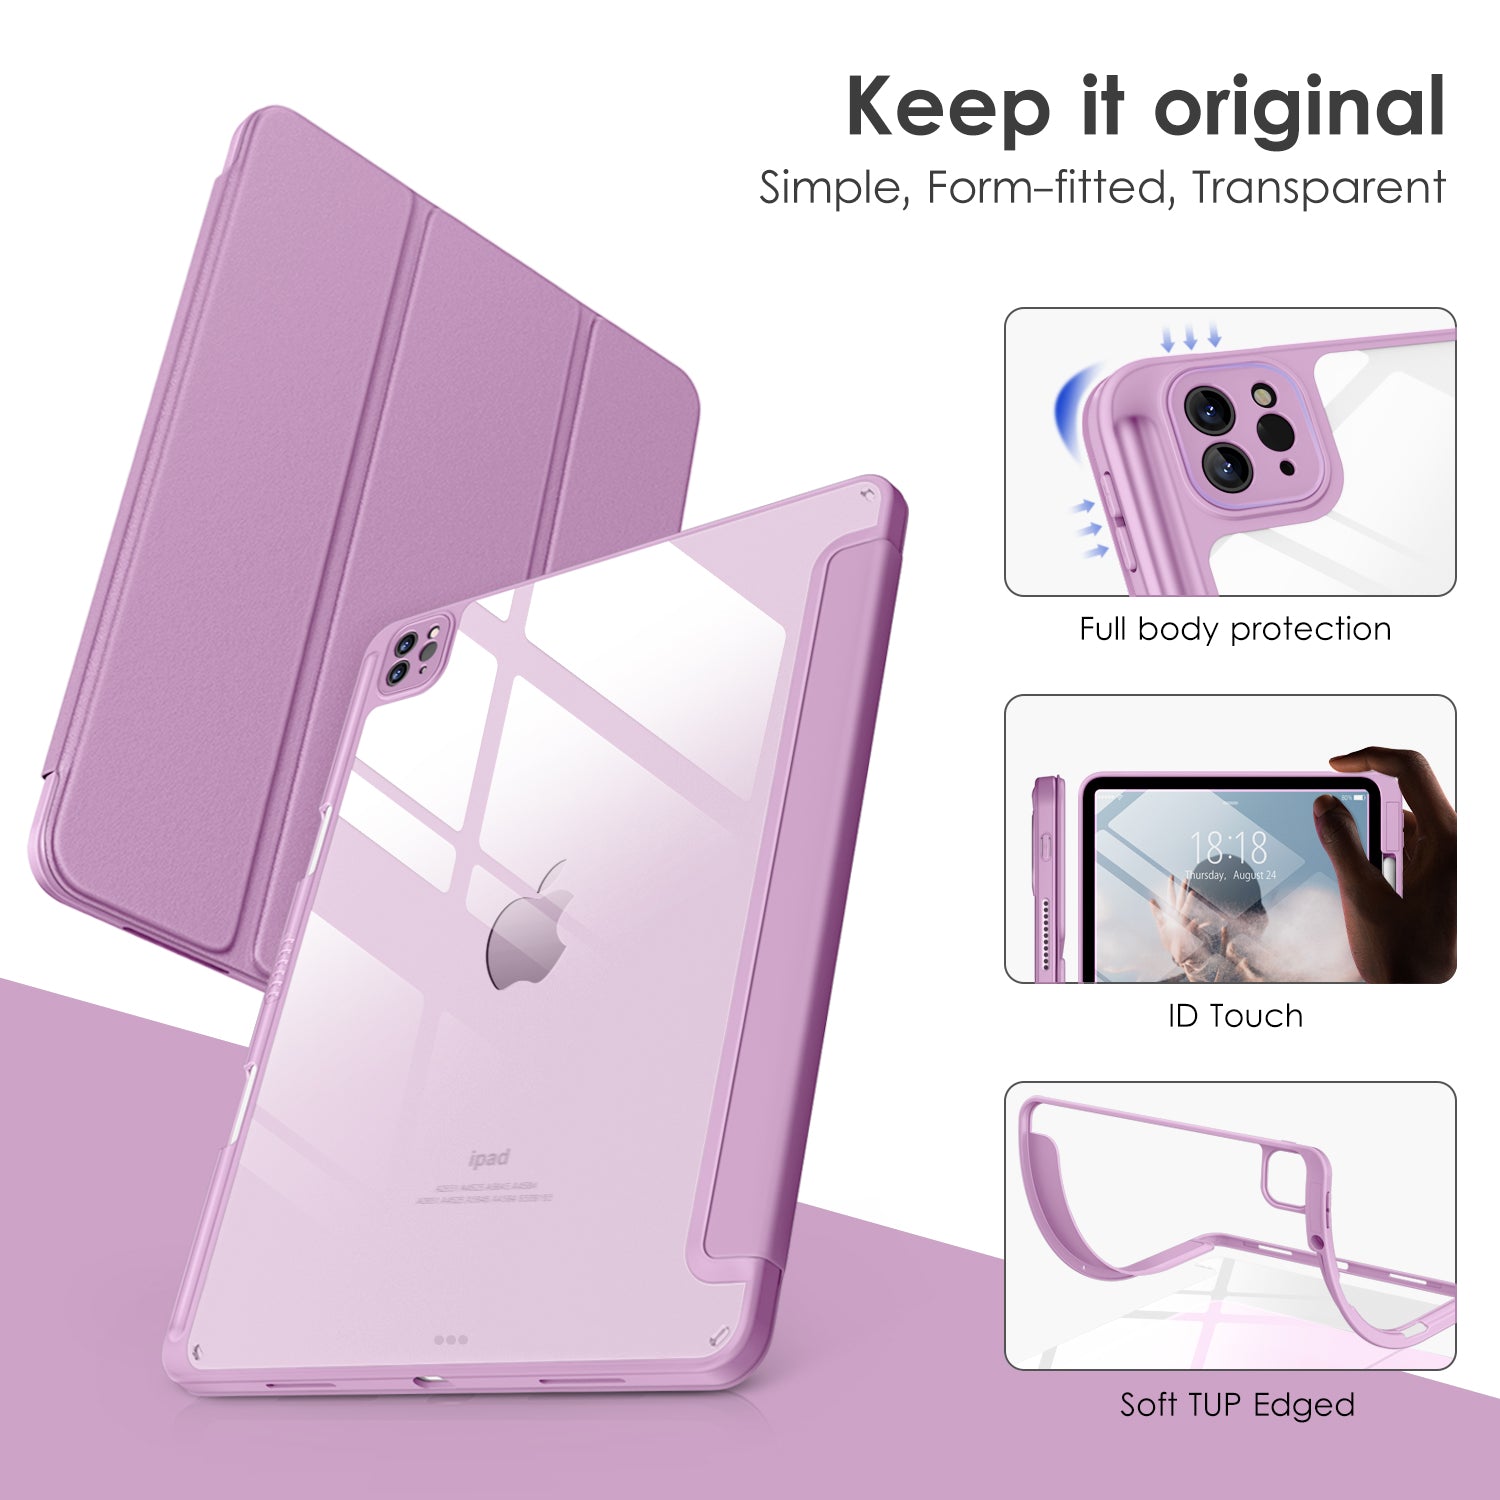 DTTOCASE iPad Pro 12.9 Case 6th / 5th / 4th / 3rd Generation 2022/2021 / 2020/2018,12.9 inch Clear Back Cover[Built-in Pencil Holder,Auto Sleep/Wake,Camera Protection] for iPad Pro-Blue Purple